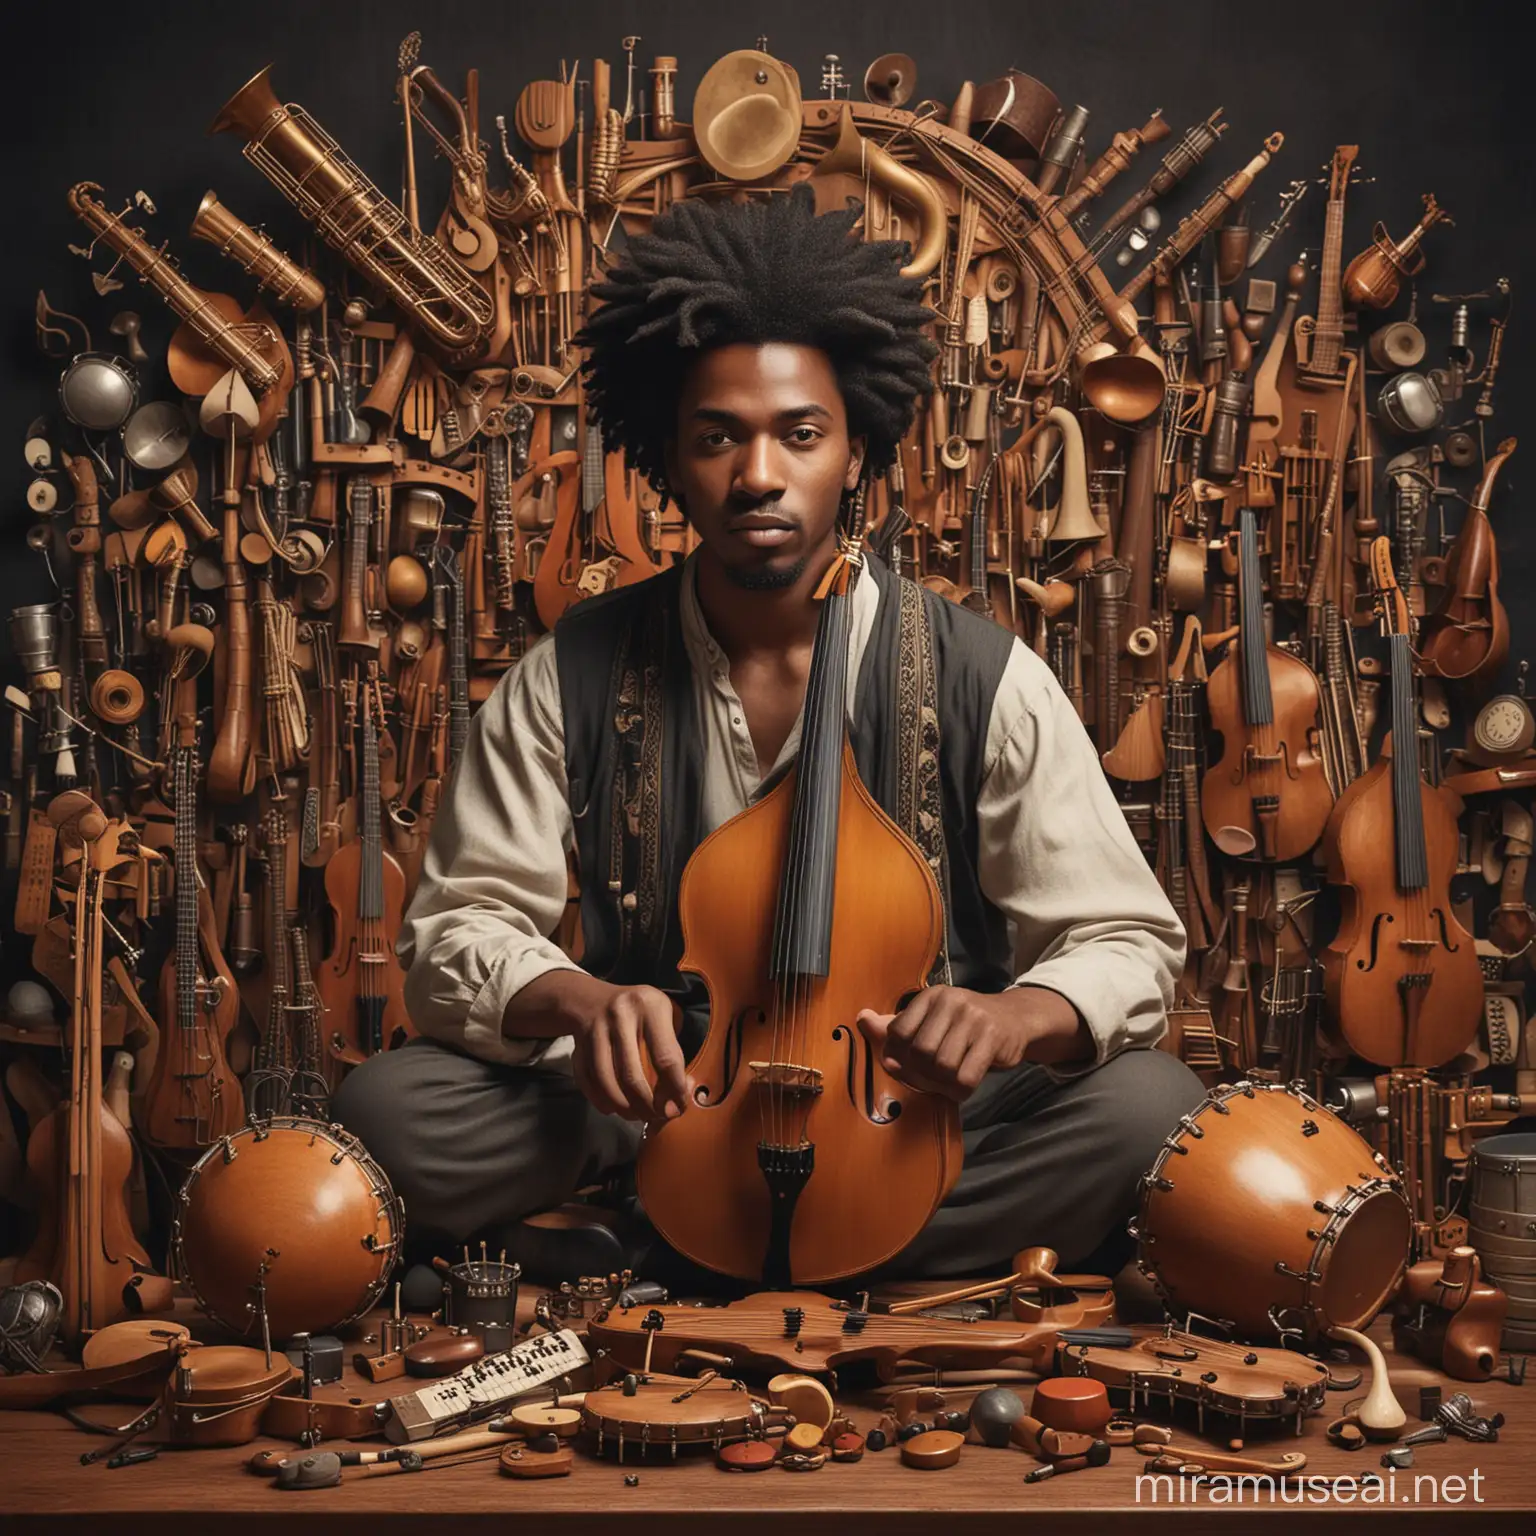 Generate an image featuring a musician surrounded by diverse musical instruments, with a backdrop that incorporates elements from different cultures. Include subtle nods to unity and harmony